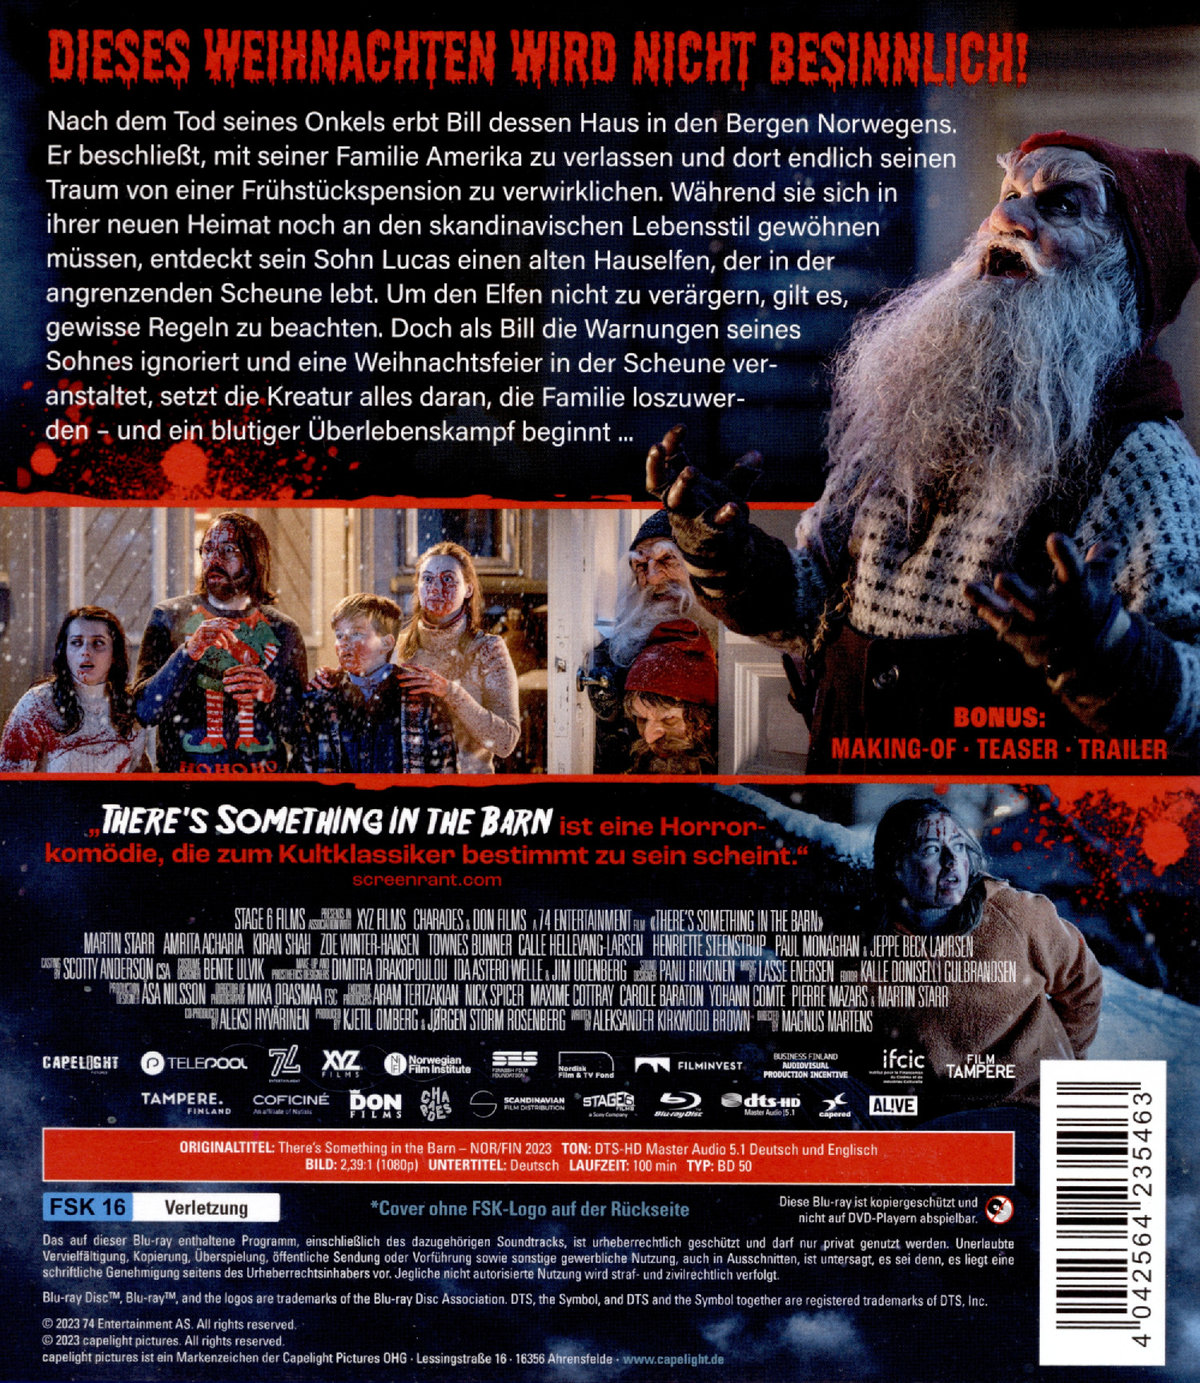 There's Something in the Barn (blu-ray)